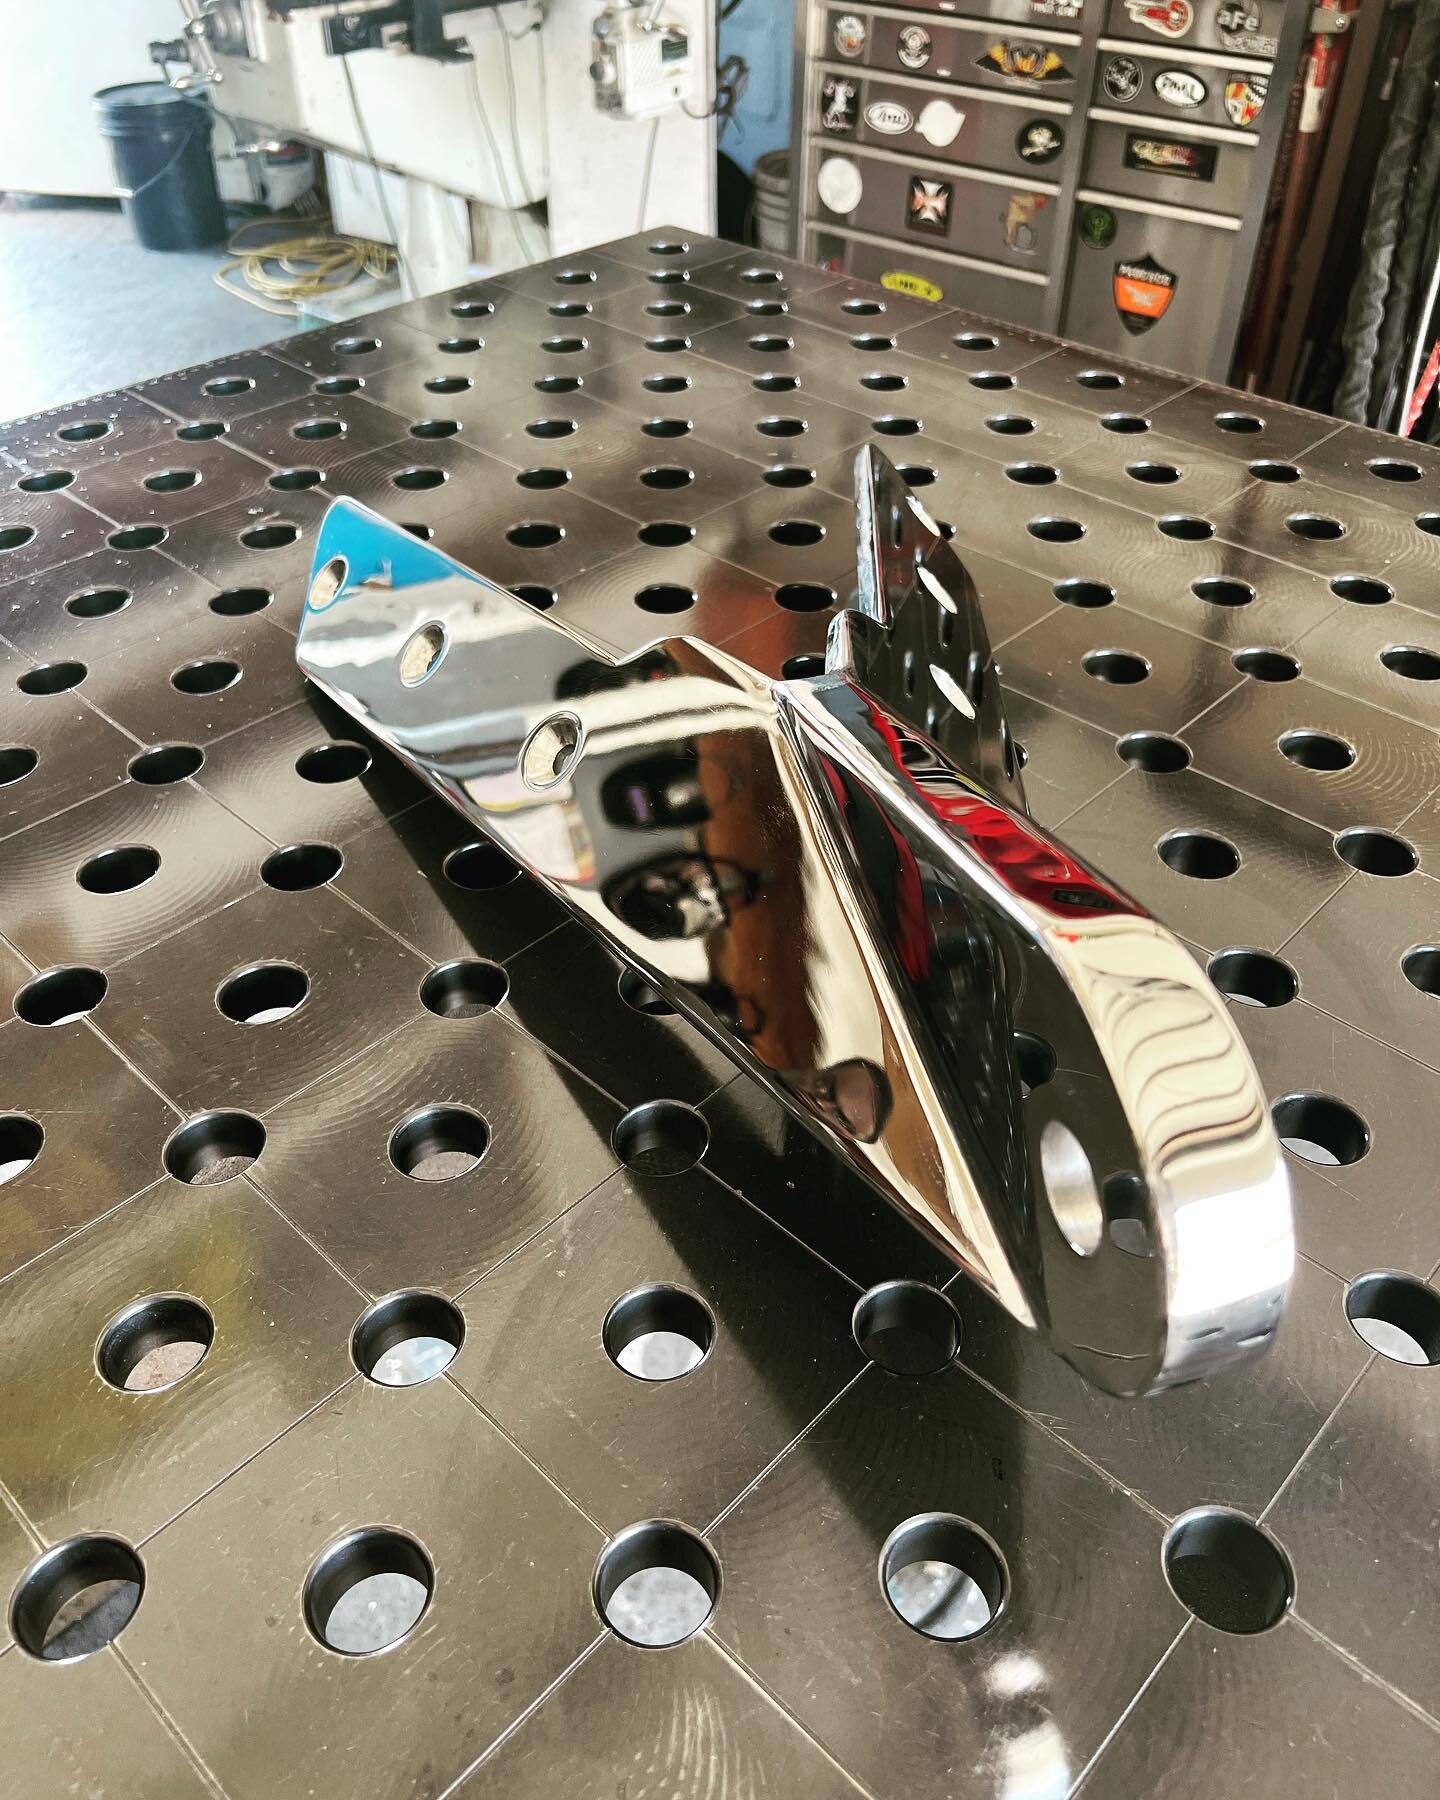 Stainless steel tow eye plate made for local customer so he can rent his boat to yacht as a tender. Need one? Give us a call. #yachtingindustry #marinewelding #stainlesssteel #tigwelding #sintmaarten #stbarth #nothingwecantdo #millerwelders